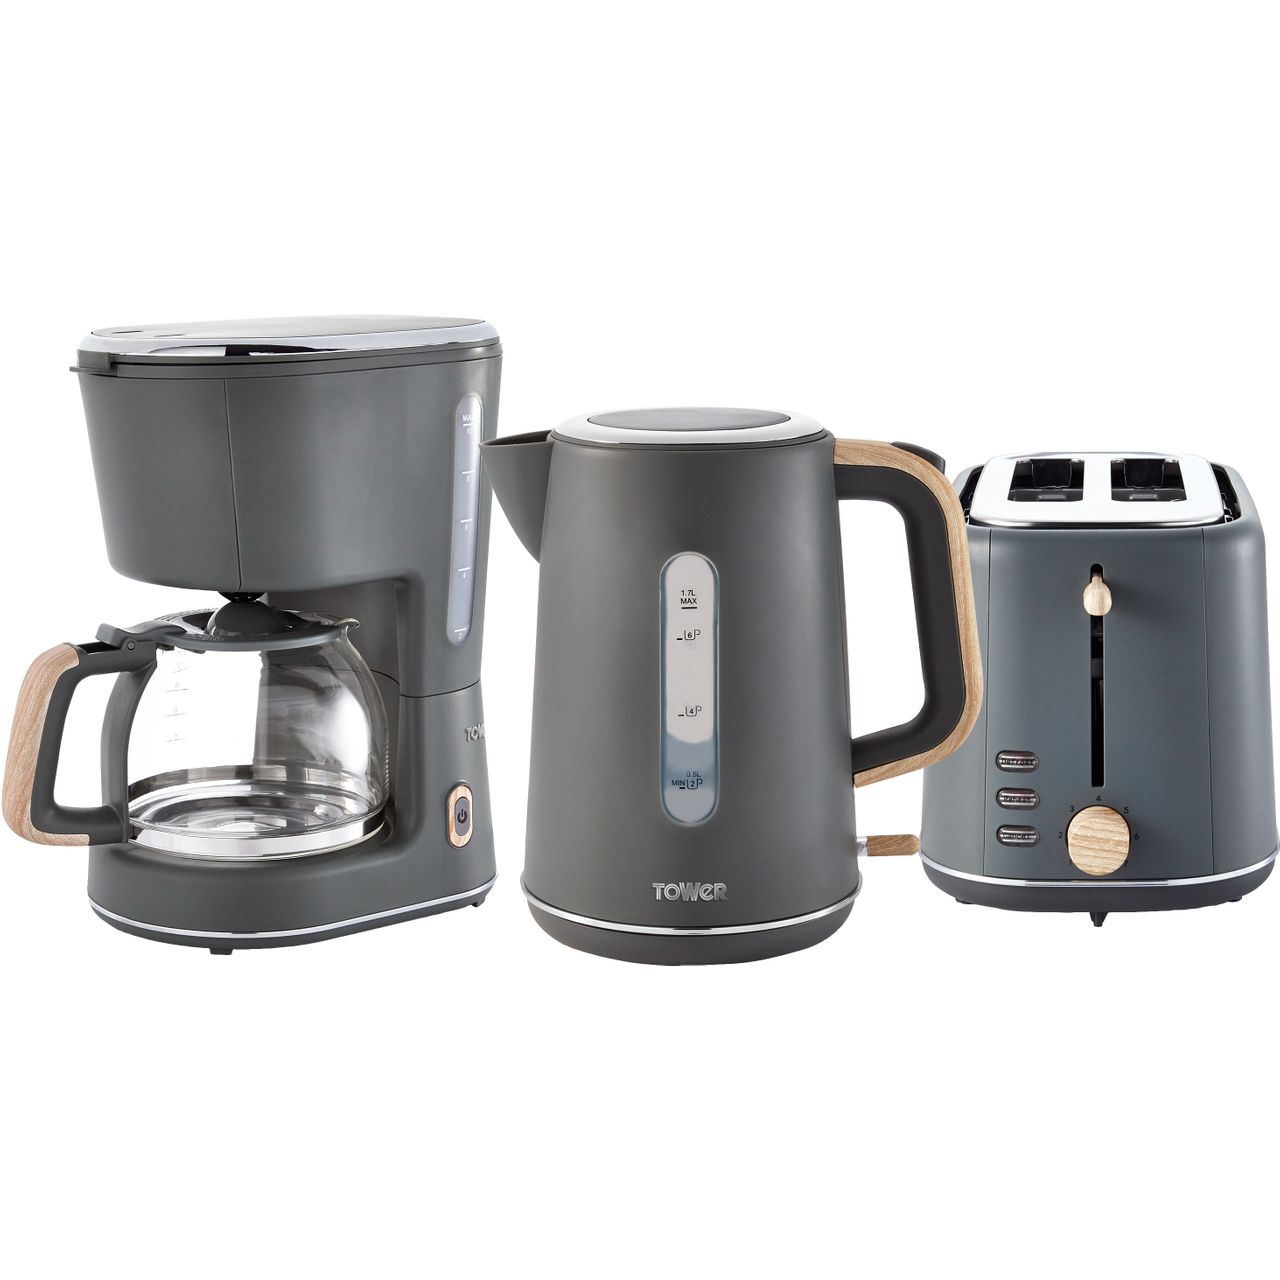 Tower Scandi AOBUNDLE018 Kettle And Toaster Sets Review